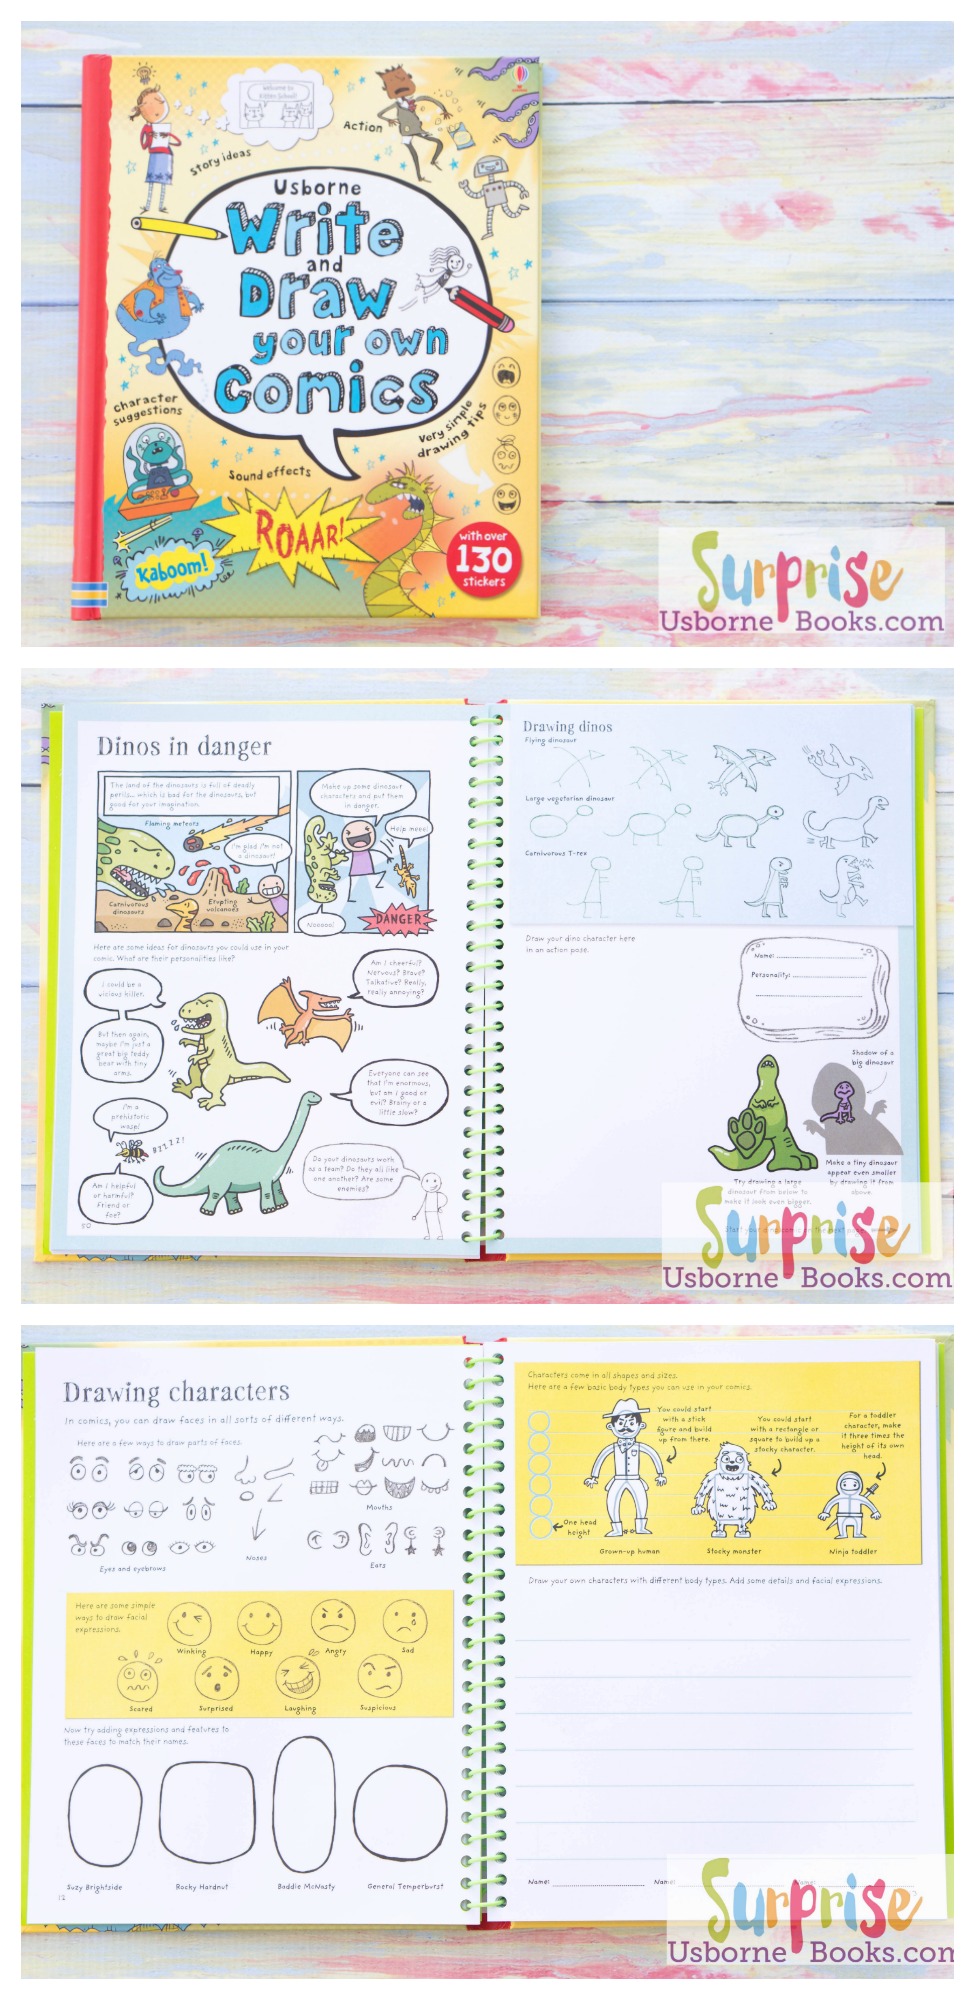 Write and Draw Your Own Comics - Surprise Usborne Books